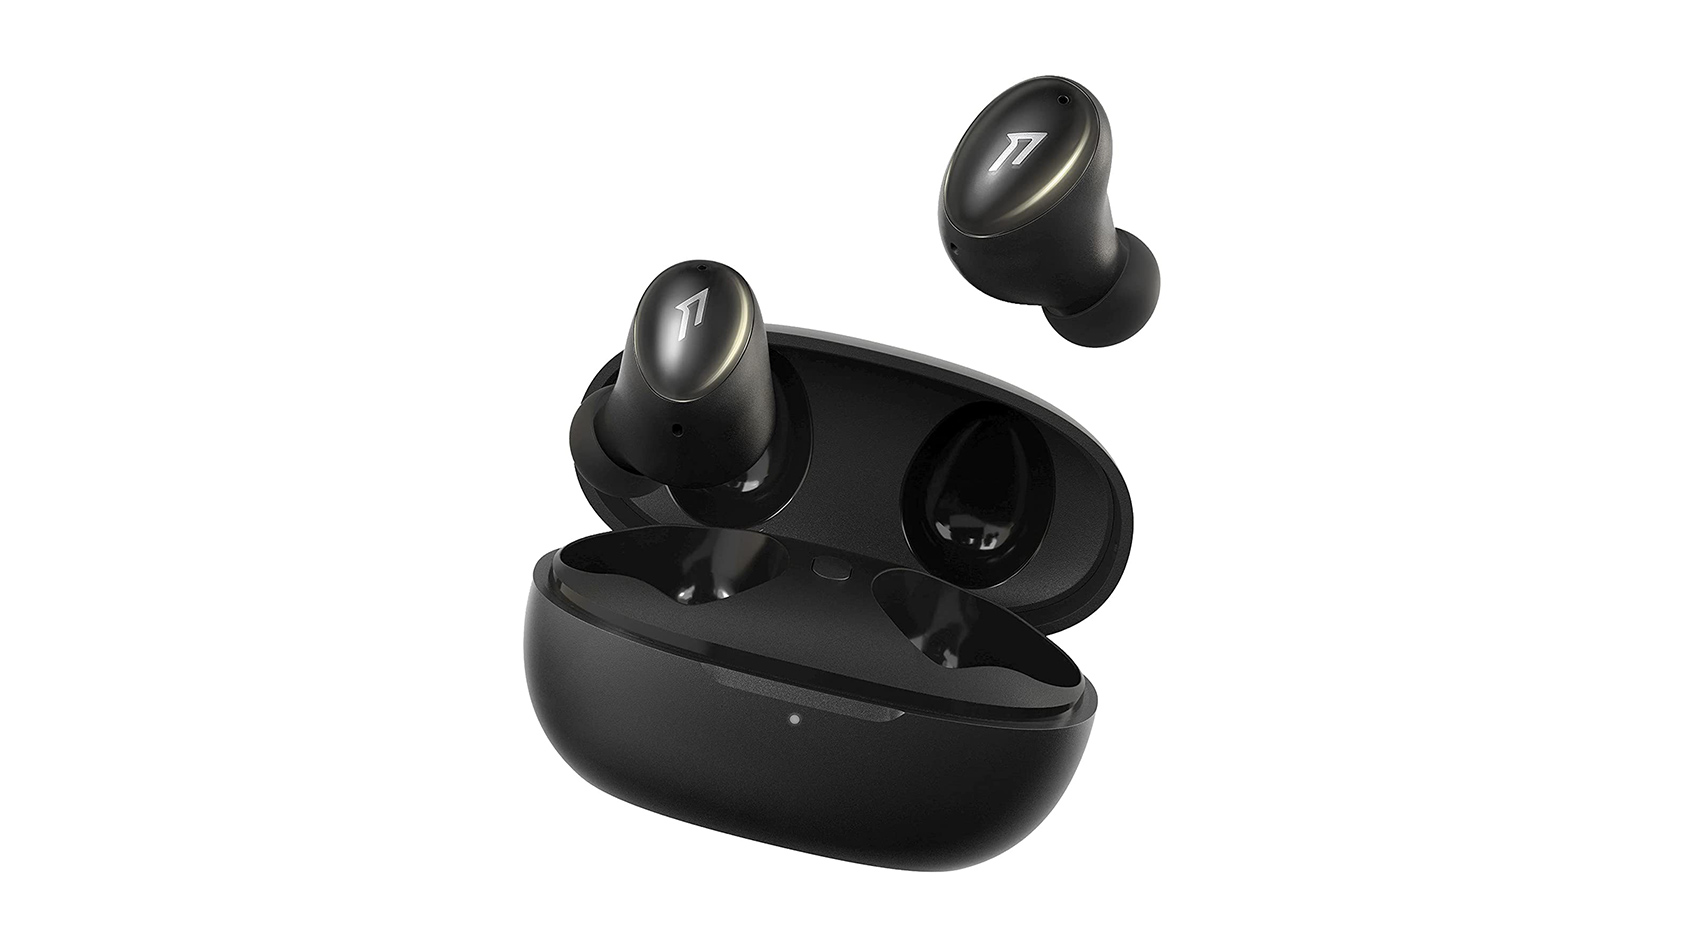 The 1MORE ColorBuds 2 in black against a white background with the true wireless earbuds floating above the case.